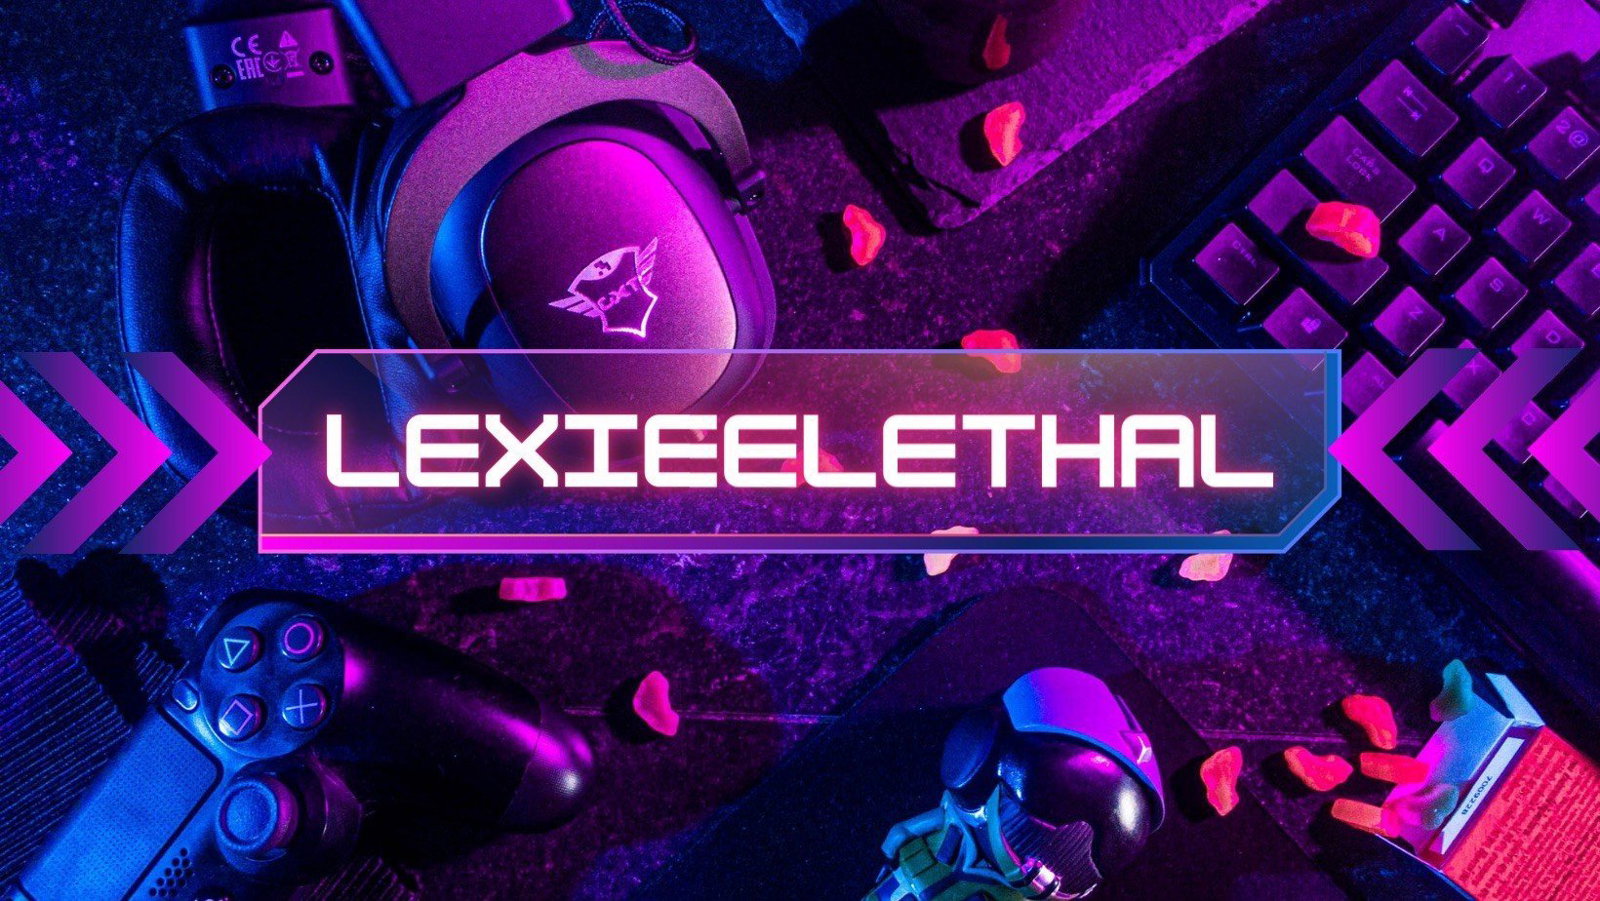 Cover photo of LexieeLethal